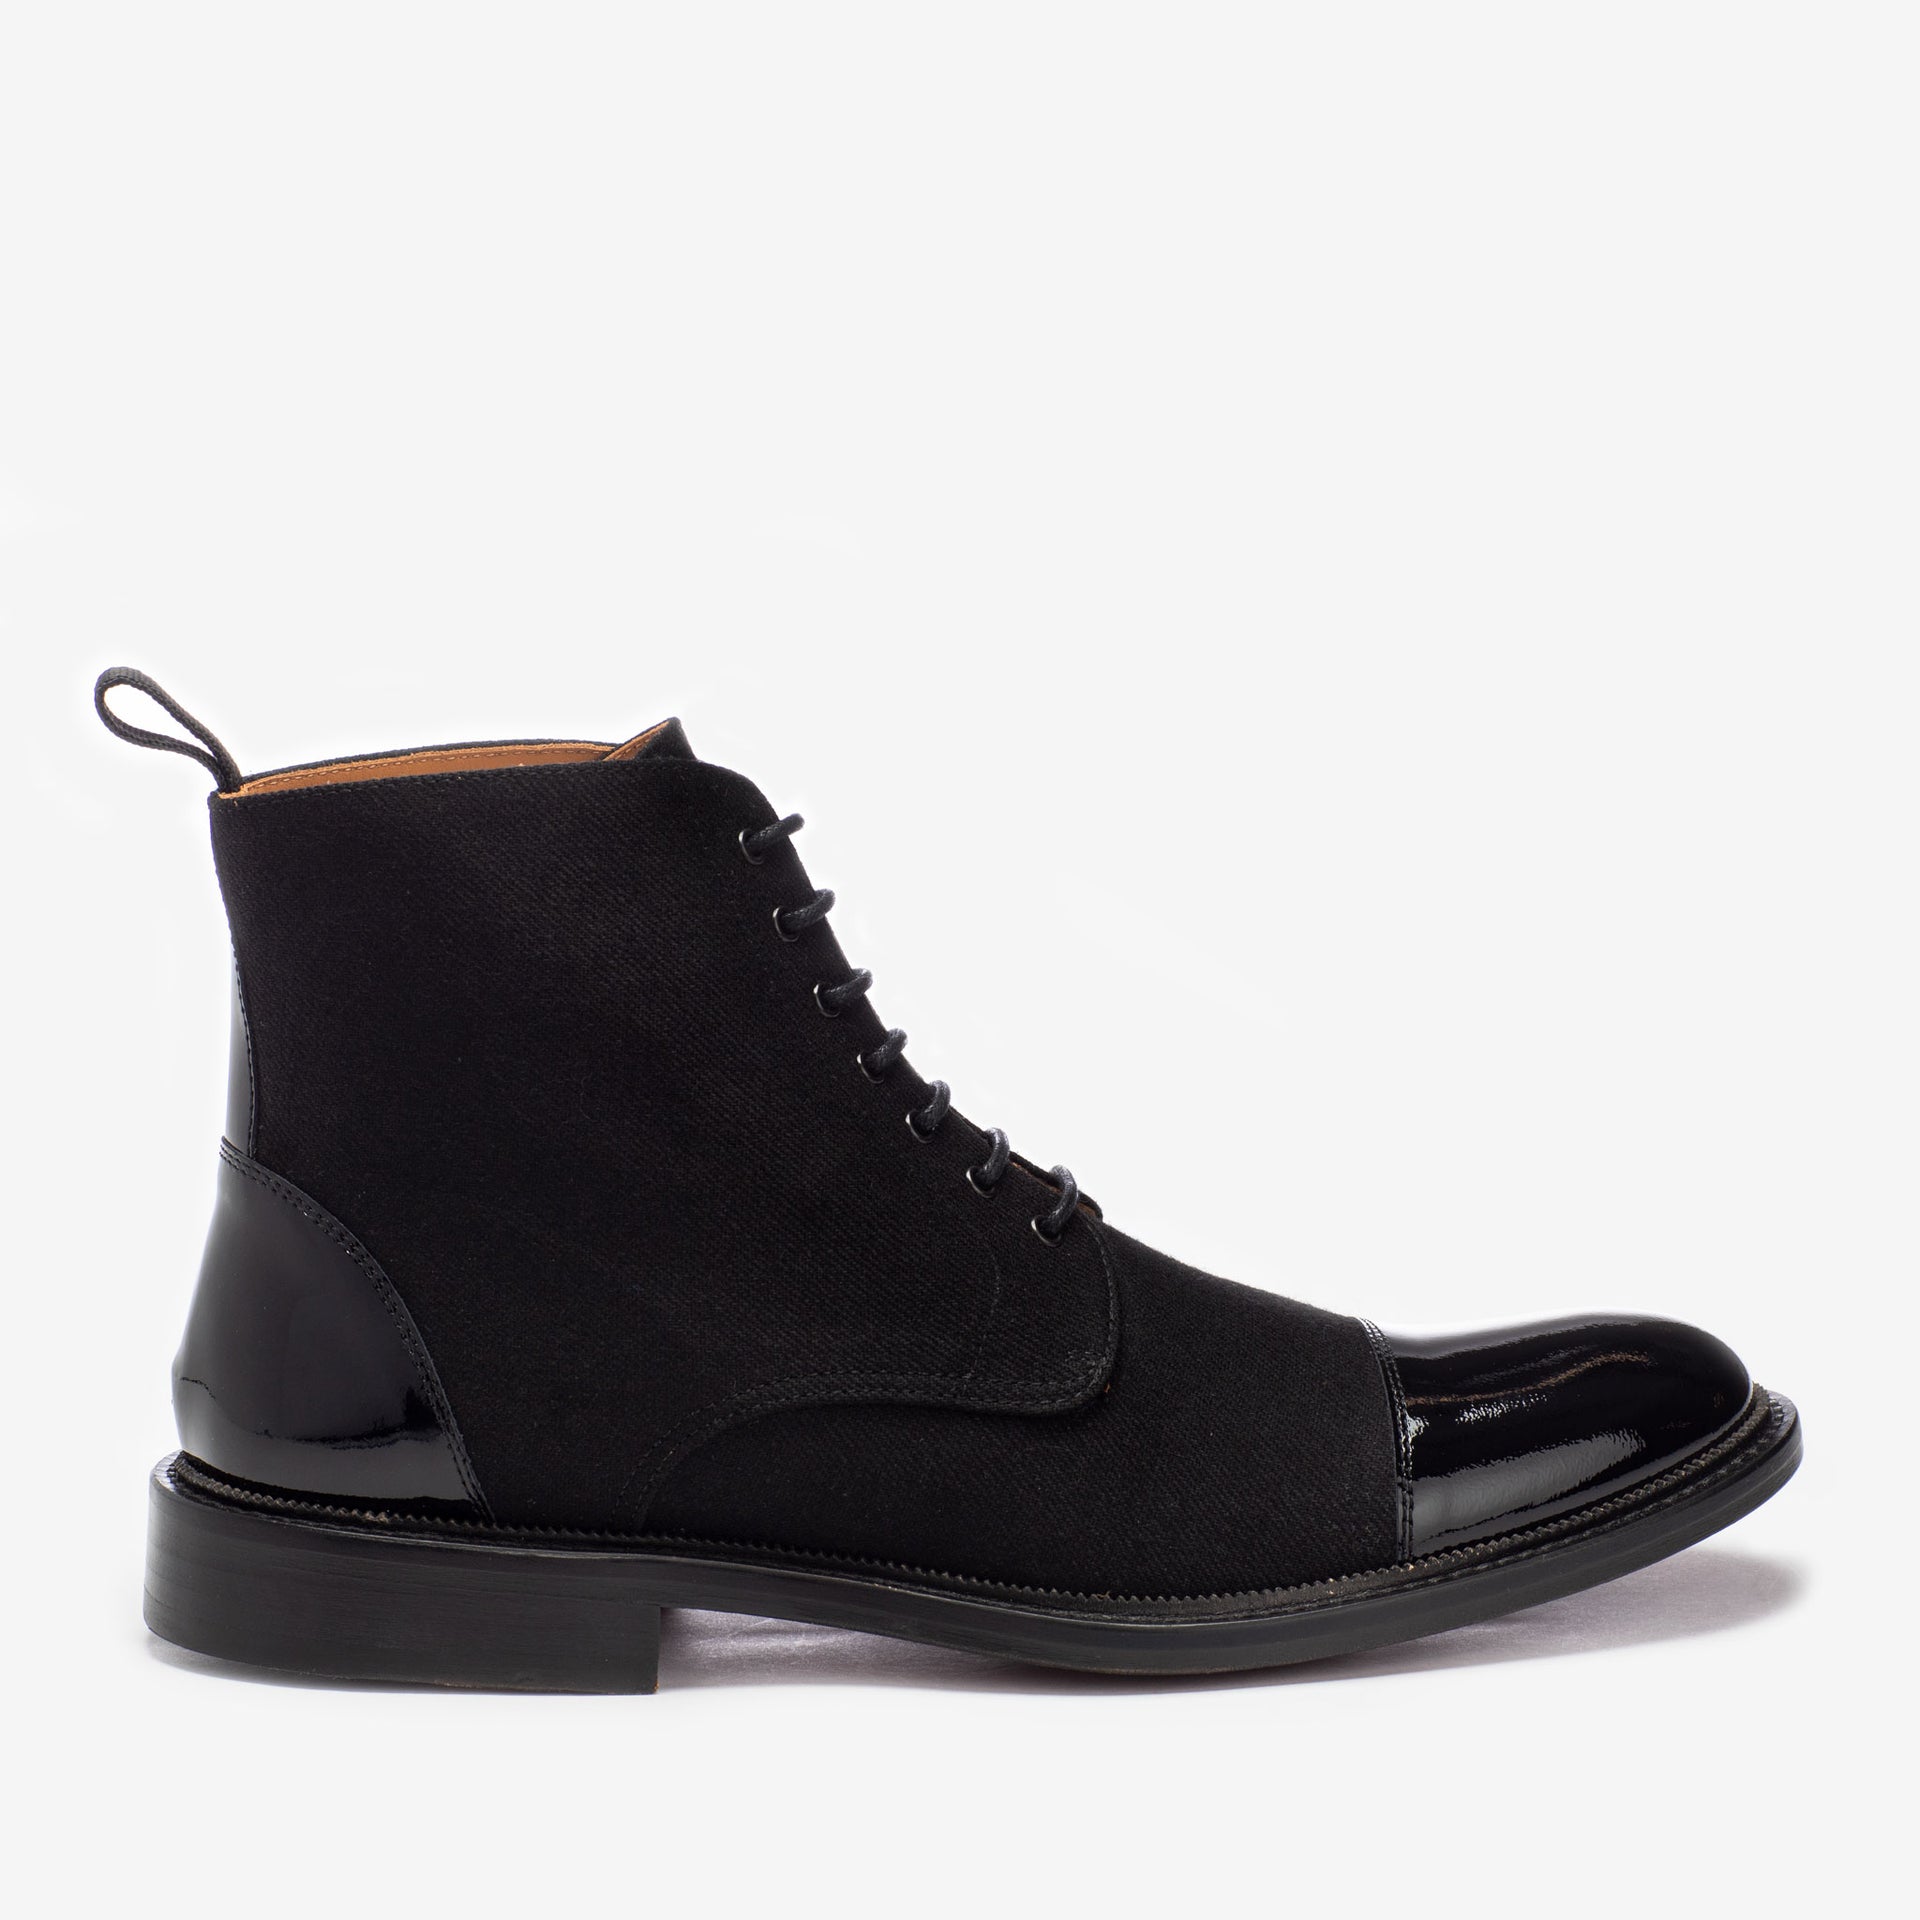 The Jack Boot in Tux - Men's Formal Boots | TAFT